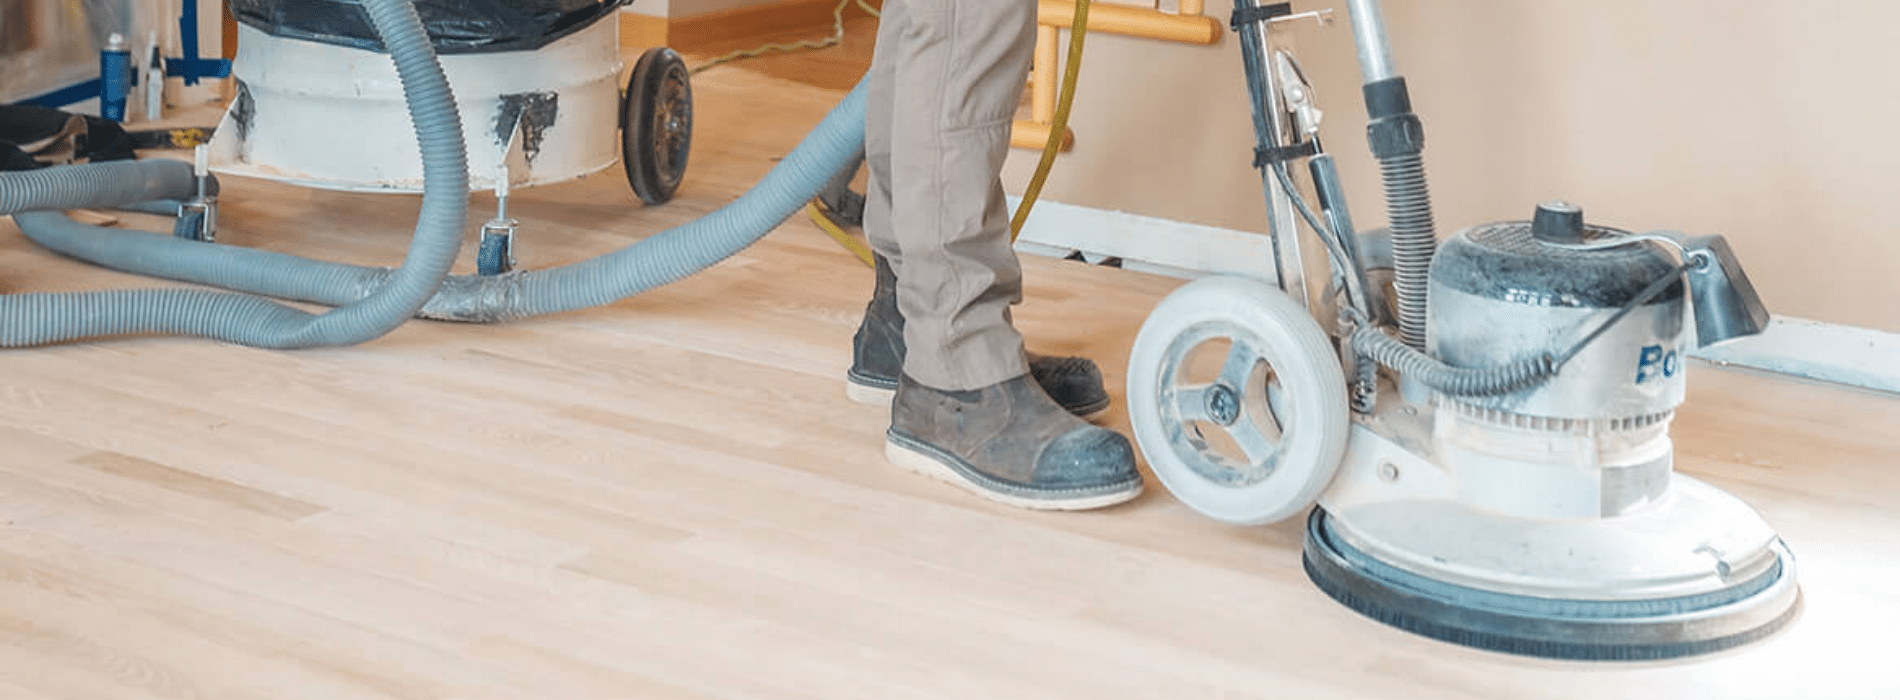 Mr Sander® in action on a herringbone pattern floor in Aldershot, GU11. A 2.2 kW Bona buffer sander with a dust extraction system and HEPA filter is used by the Mr Sander® team to ensure a clean and efficient restoration process.